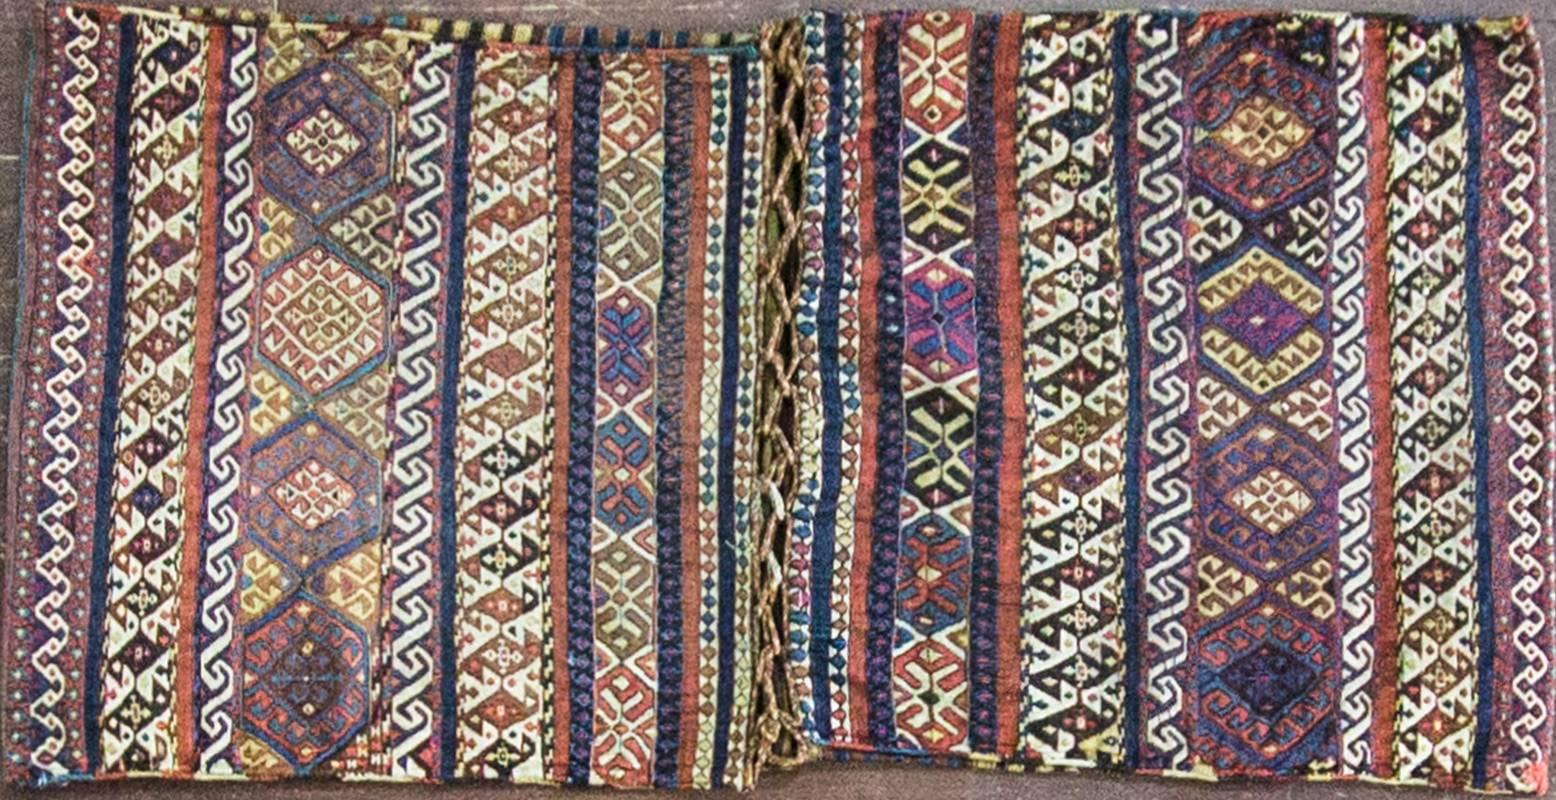 Uniquely, Shahsavan rugs and carpets were woven in an area of Persia known as the Transcaucasus – located today in extreme Northwest Iran and the caucuses.
Shahsavan weavings have a strongly tribal flavor with highly abstract, geometric designs and